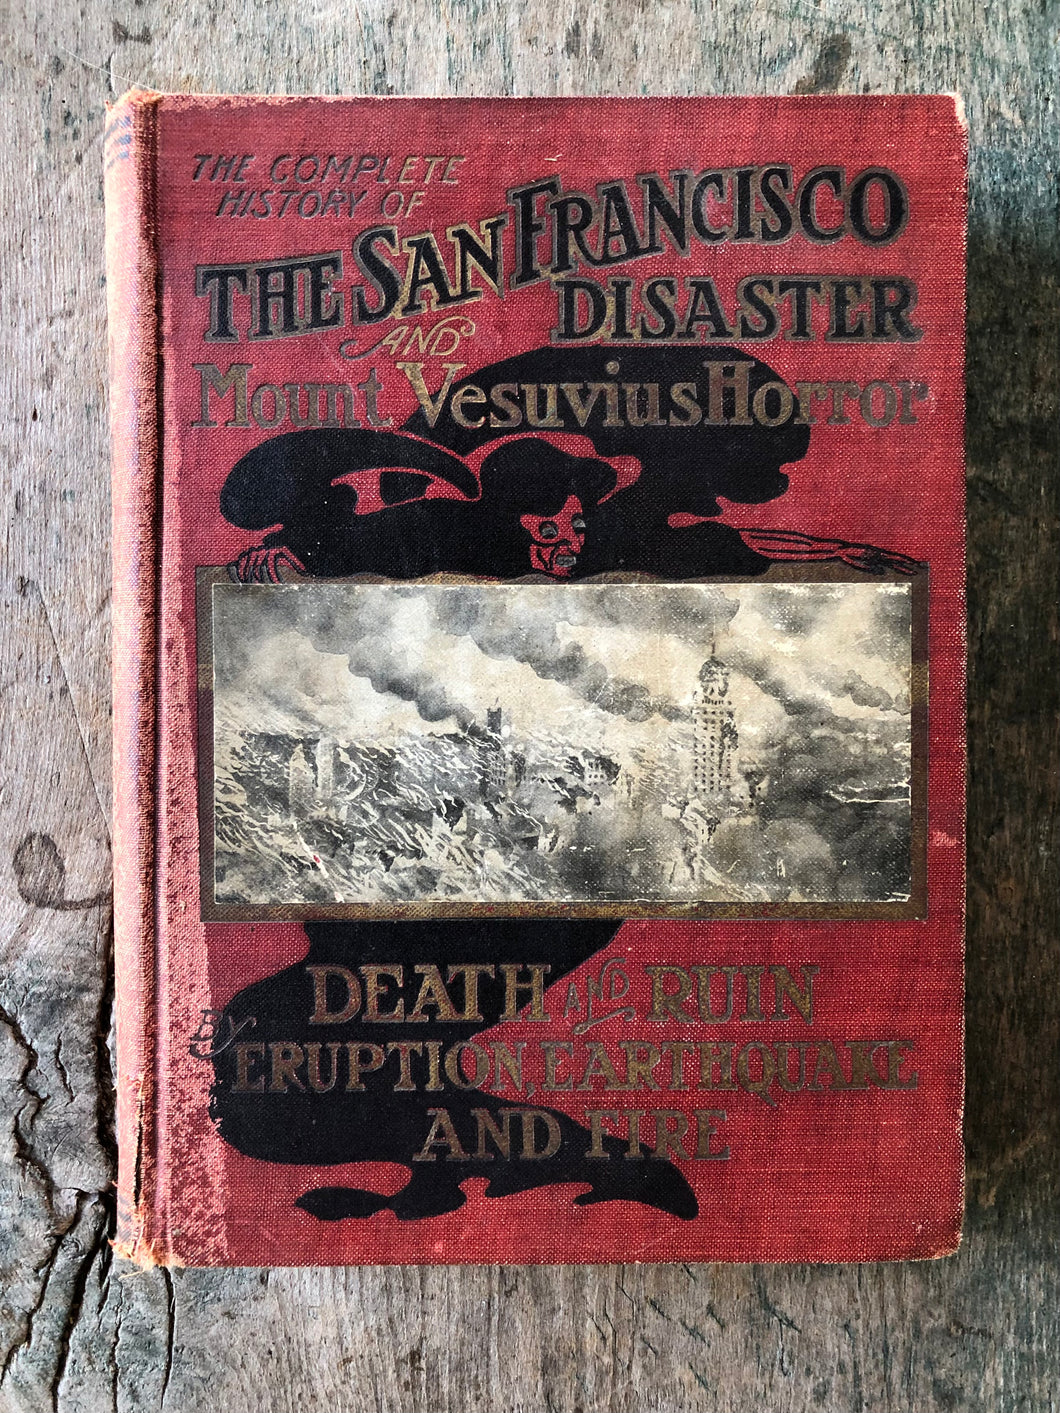 The History of the San Francisco Disaster and Mount Vesuvius Horror by Charles Eugene Banks and Opie Read